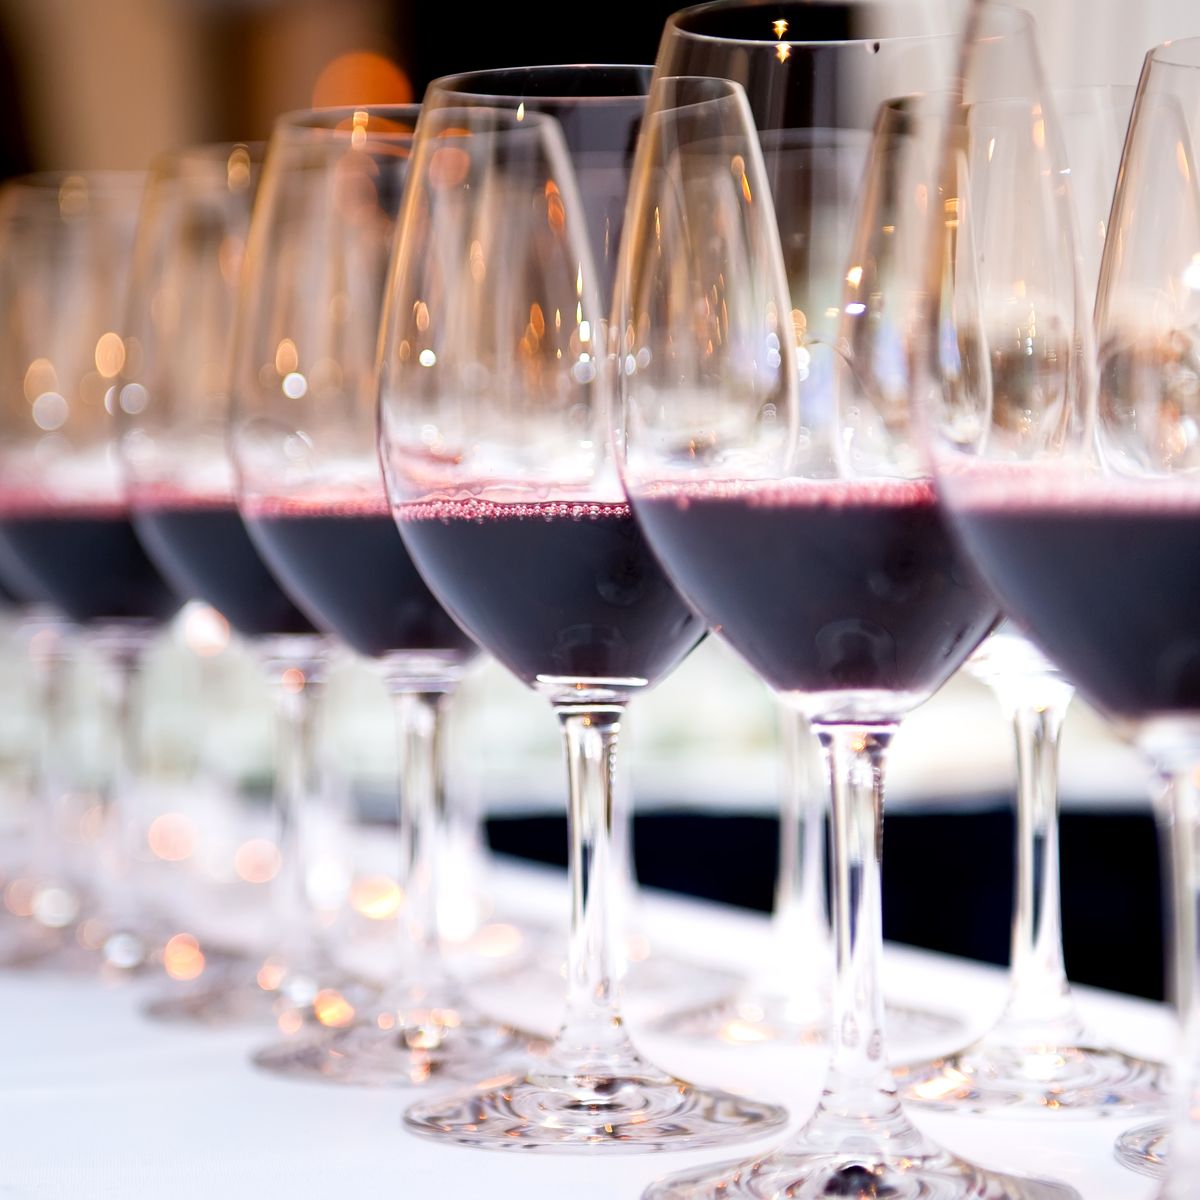 Soar spion støn What Are The Red Wine Types? The 8 Major Kinds of Red Wine